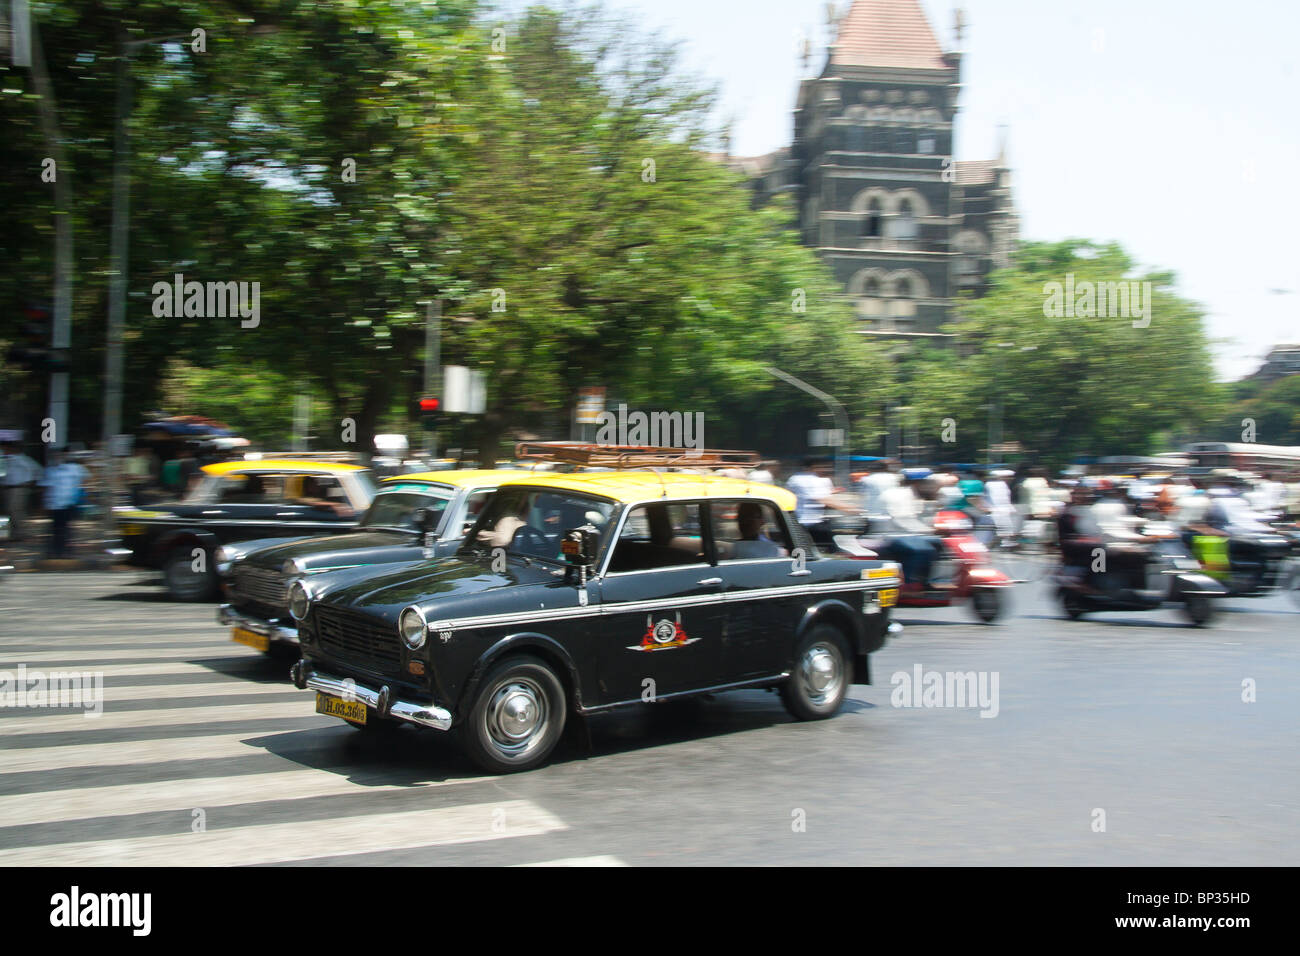 The rush of Mumbai is captured in this energetic shot of taxis shooting by on the street. Stock Photo